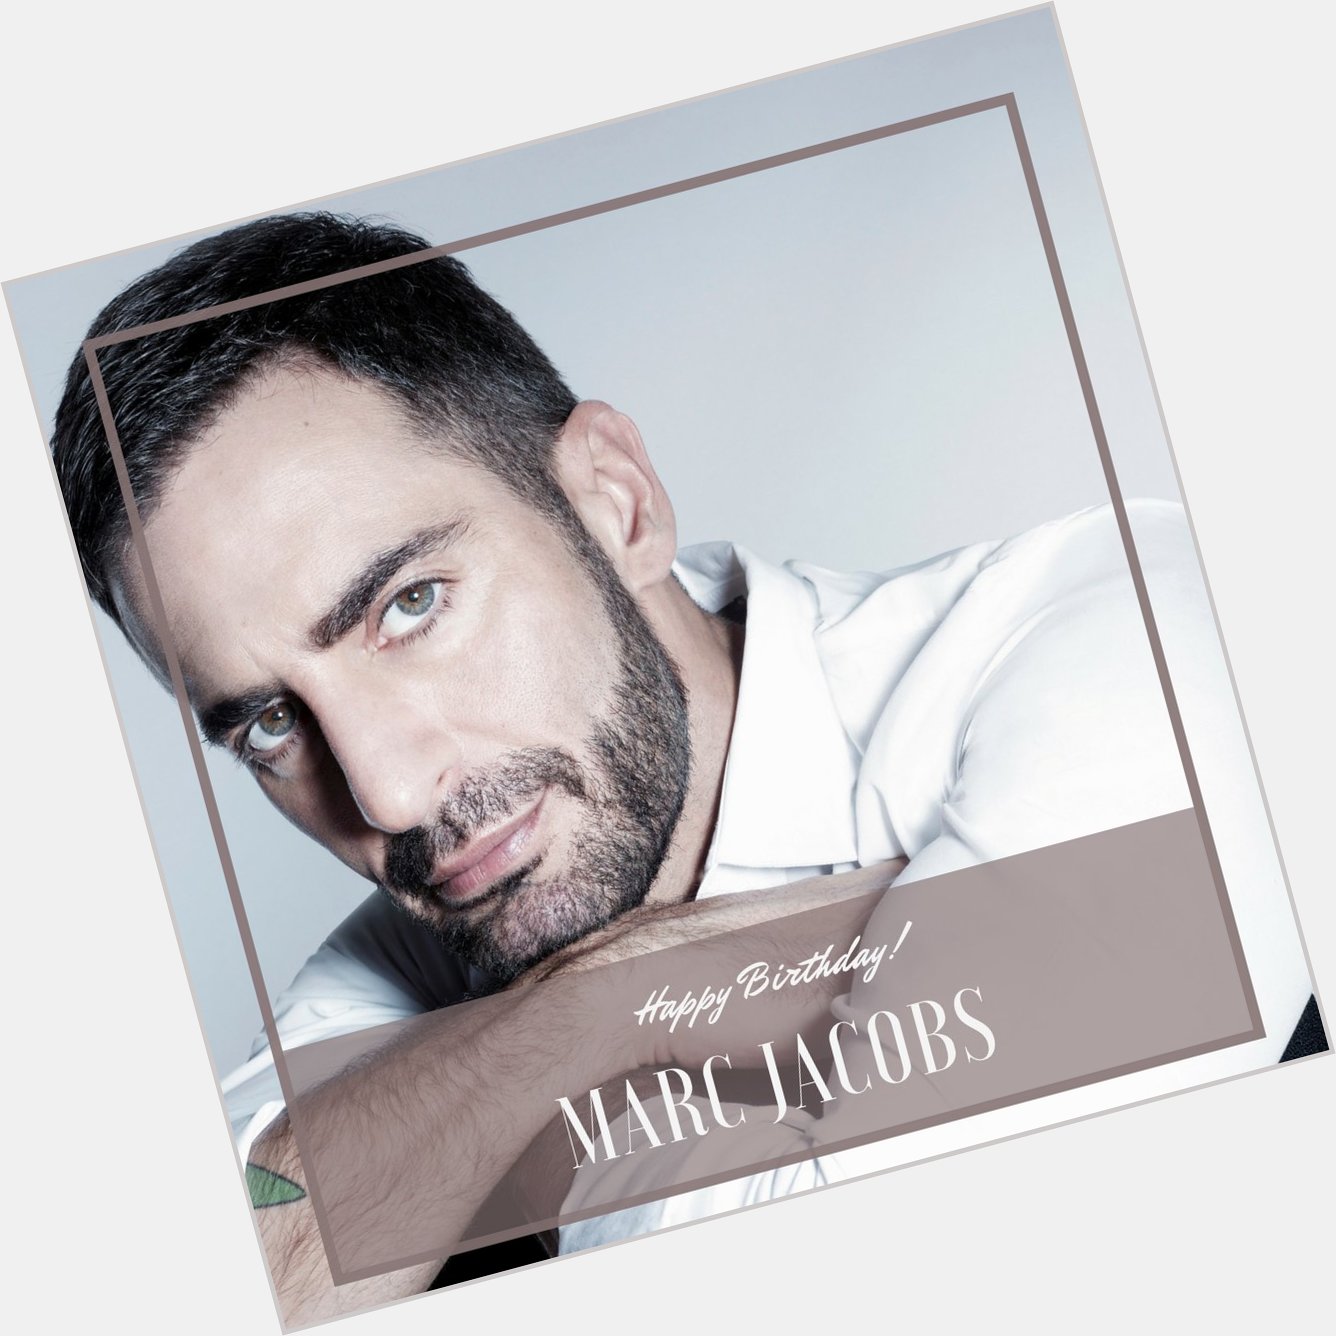 Happy birthday to style maker Marc Jacobs 